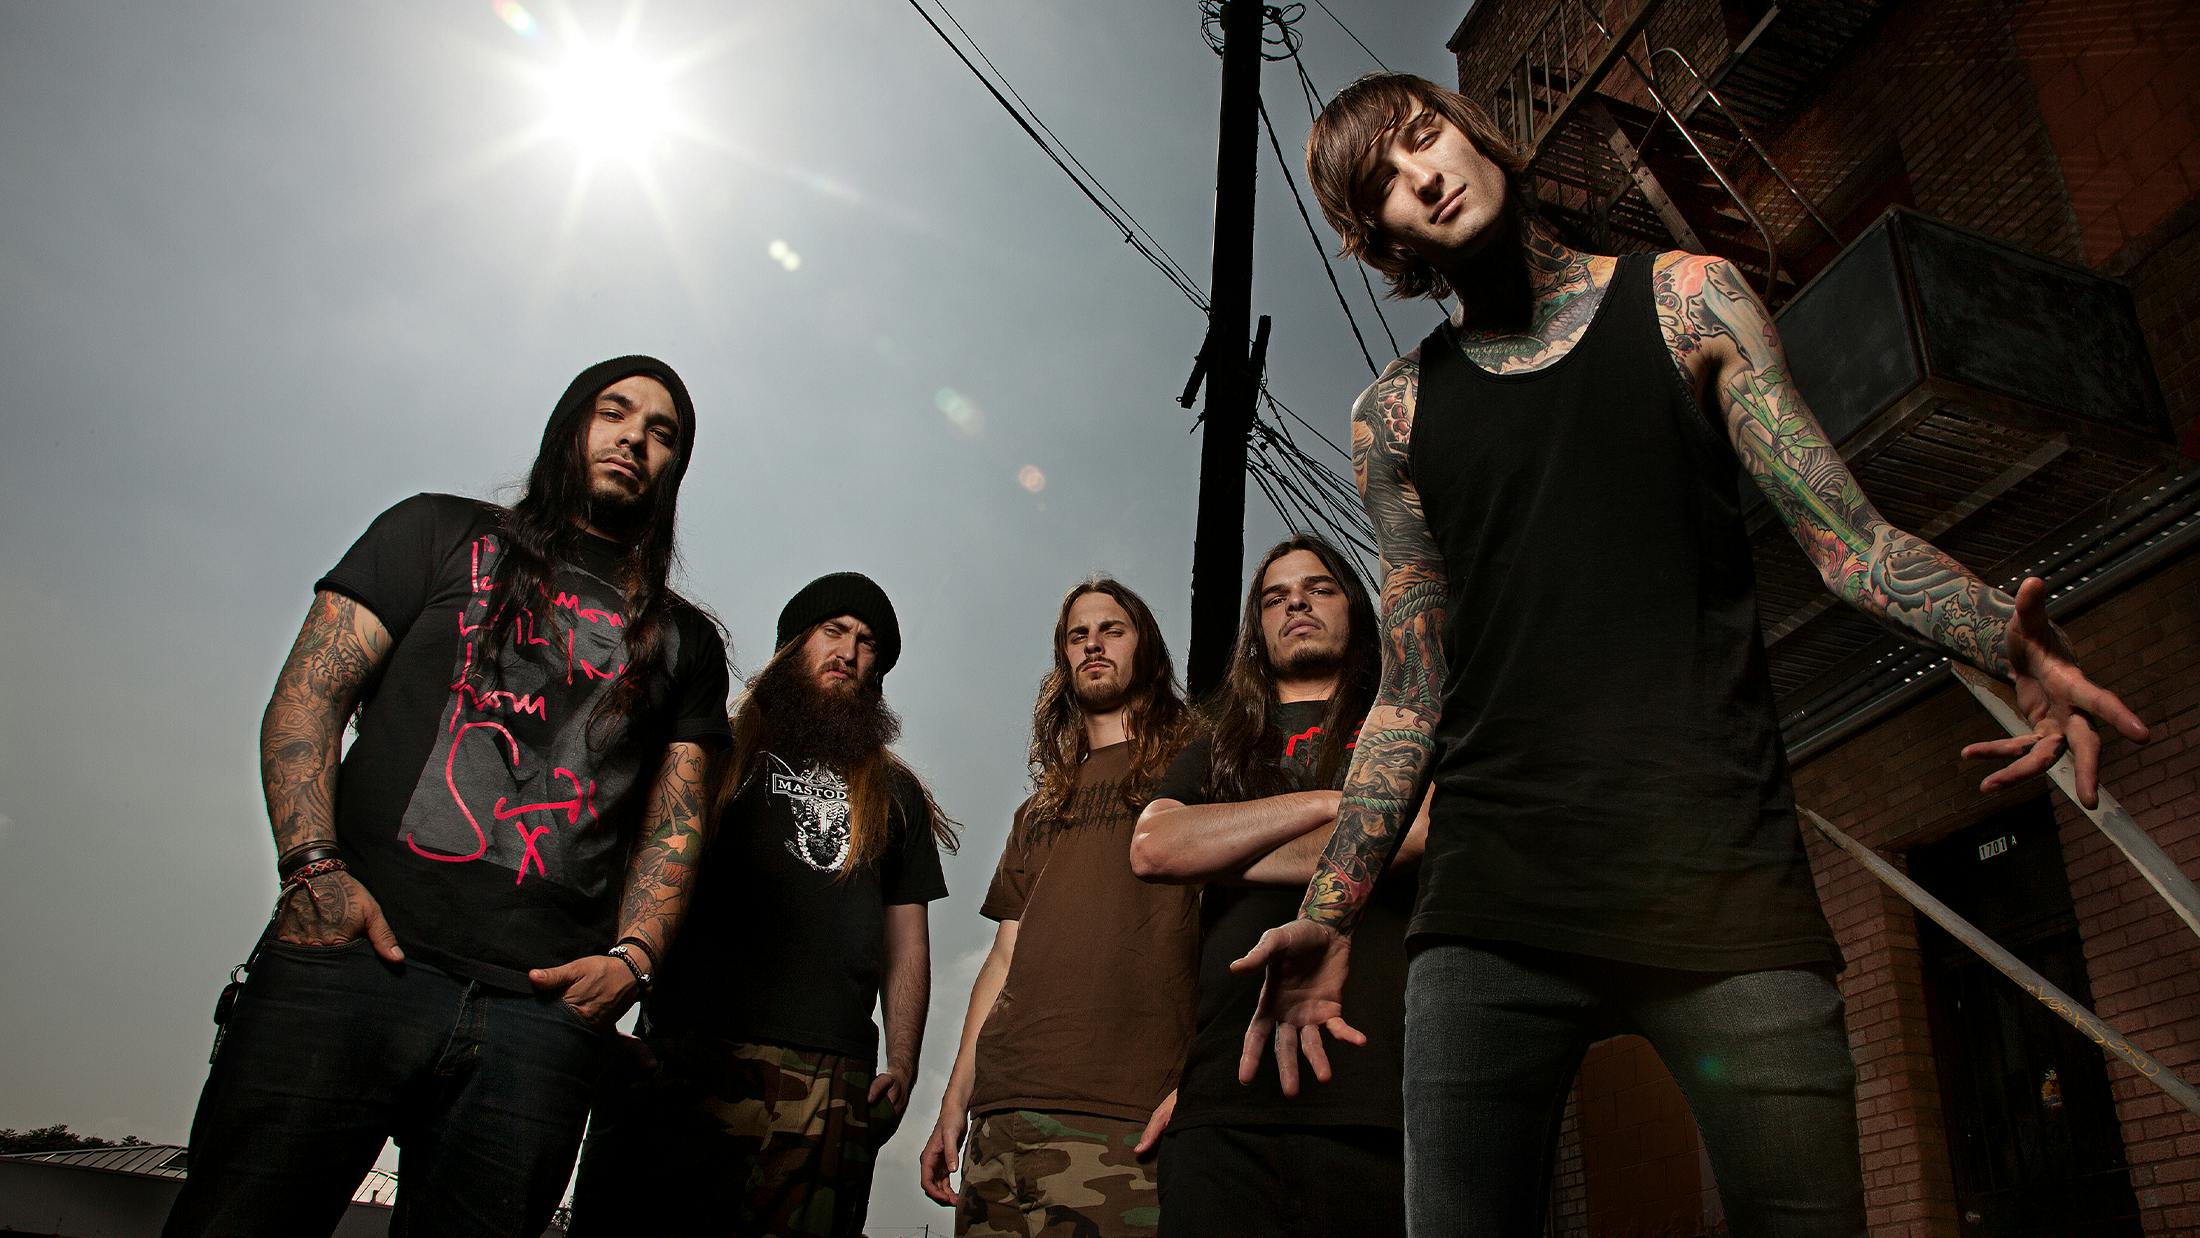 Suicide Silence pay tribute to Mitch Lucker on the 10th anniversary of his death